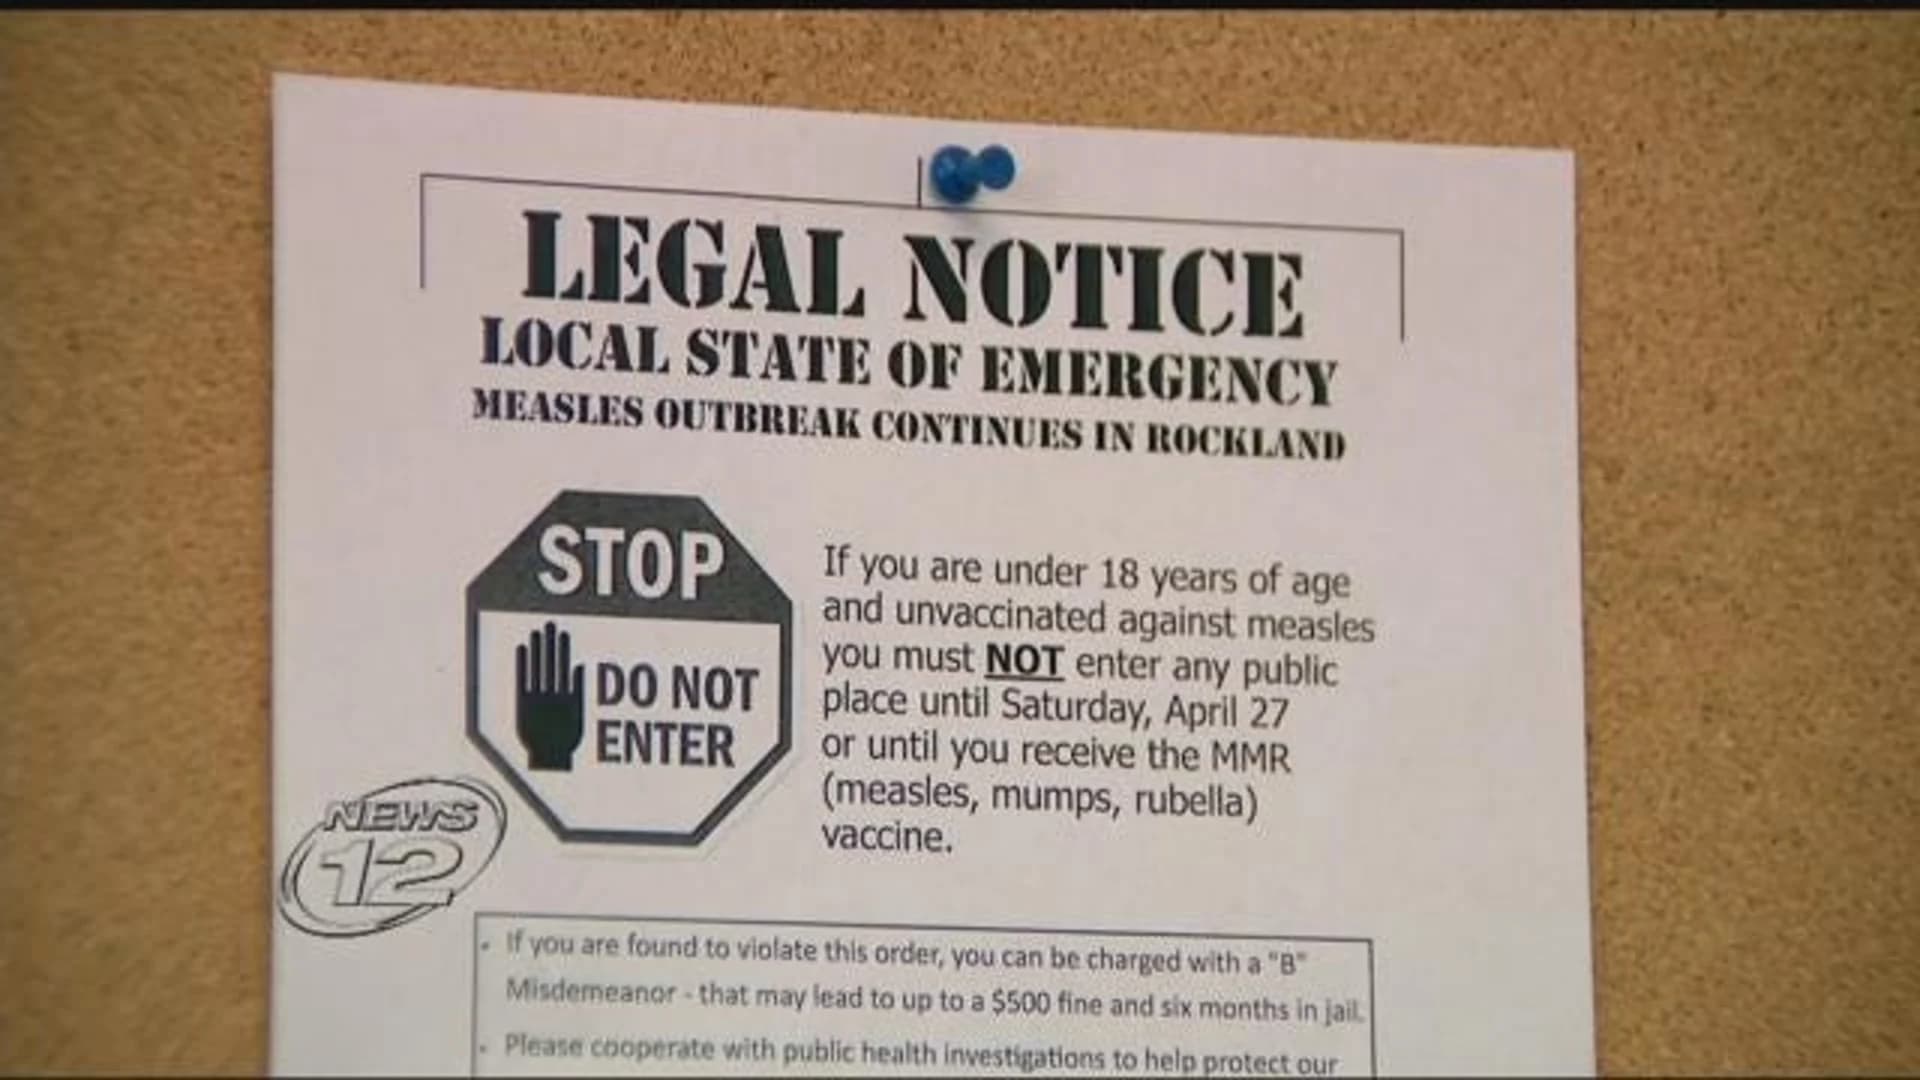 Free MMR vaccines follow measles state of emergency in Rockland